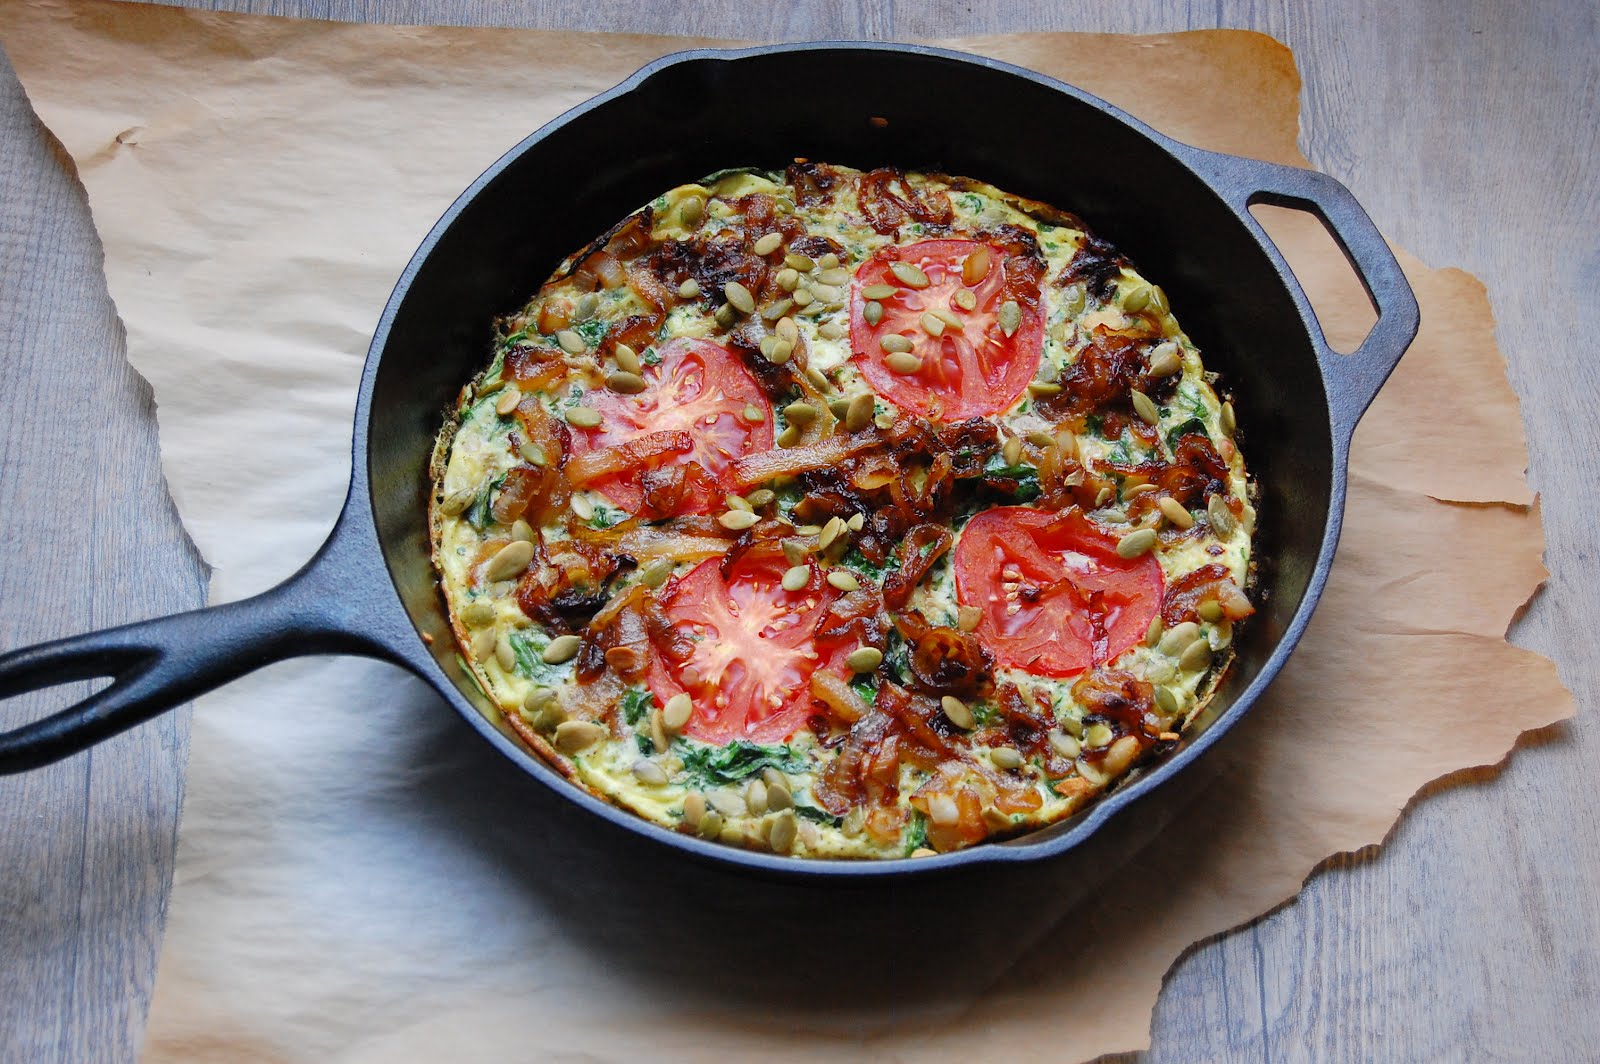 palate/palette/plate: Spinach Frittata with Caramelized Onions